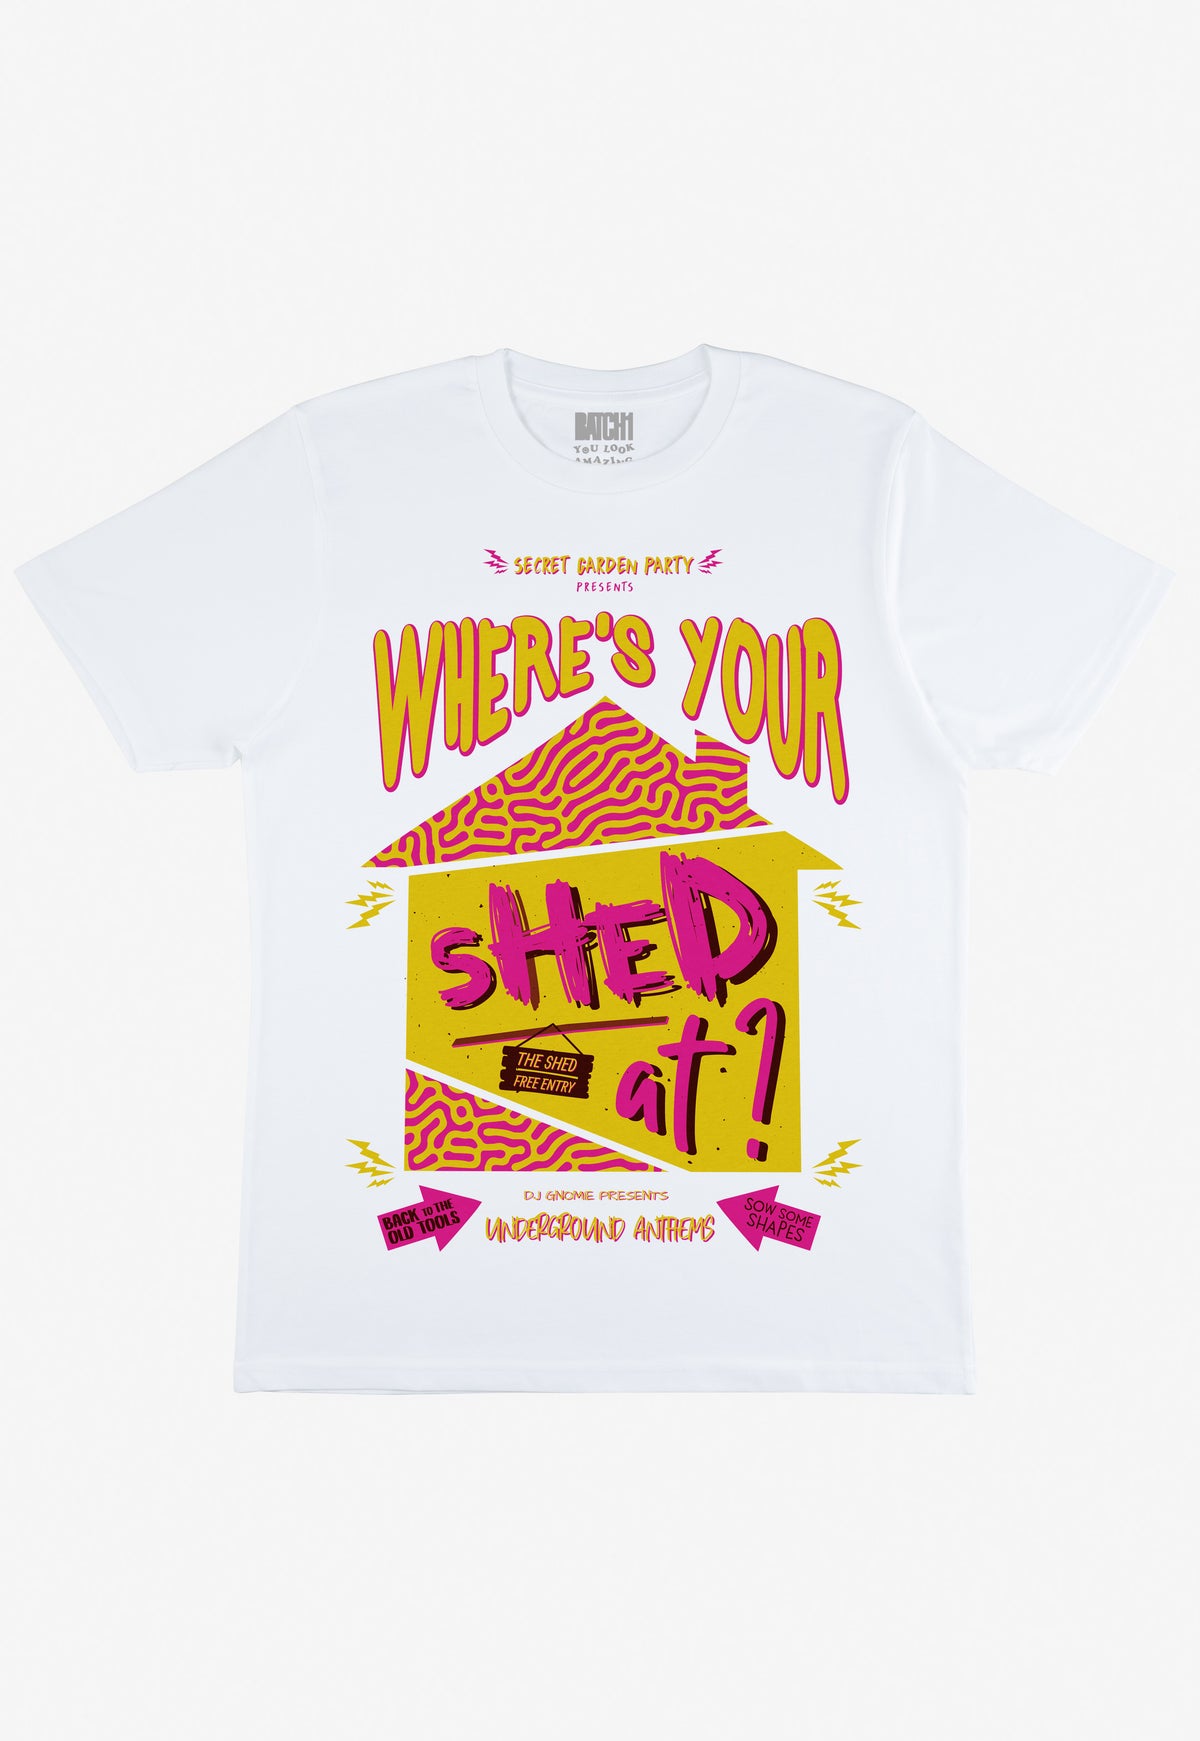 Where's Your Shed At Women's Festival T-Shirt – Batch1